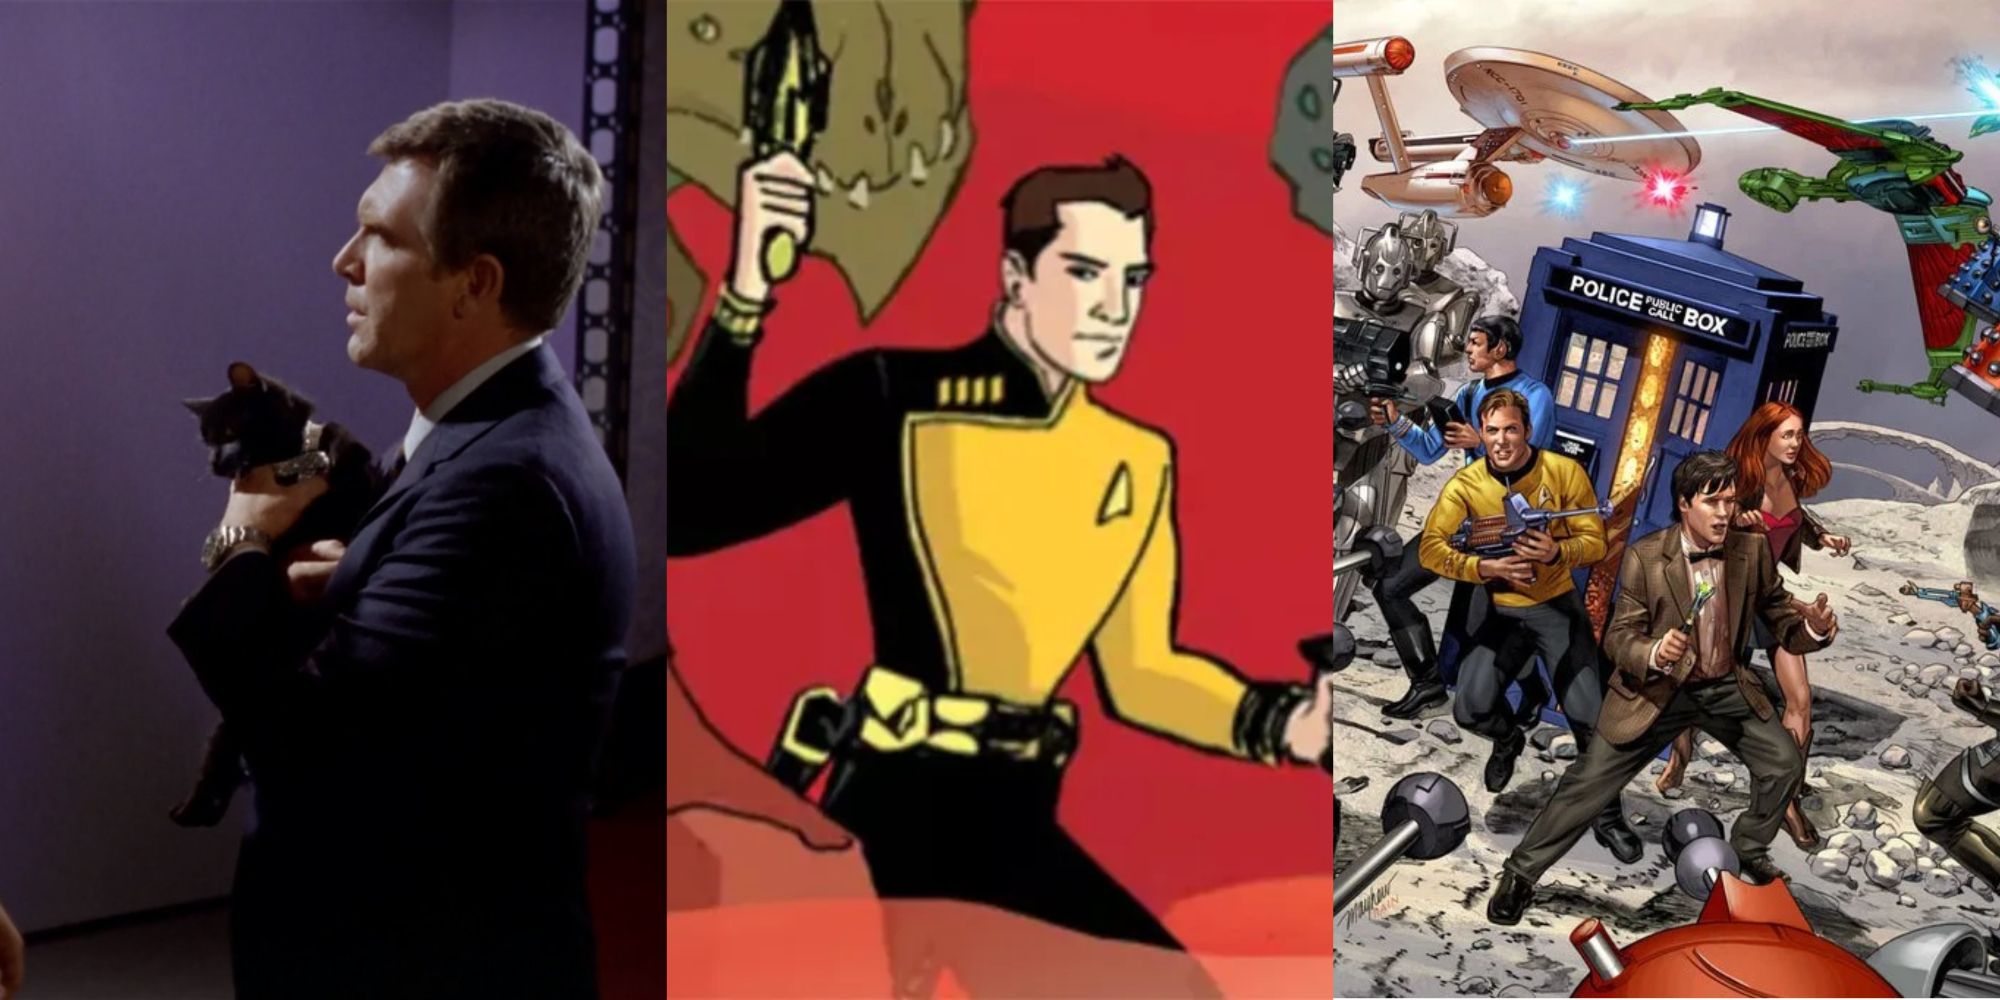 10 Scrapped Star Trek Projects That Should Be Revived